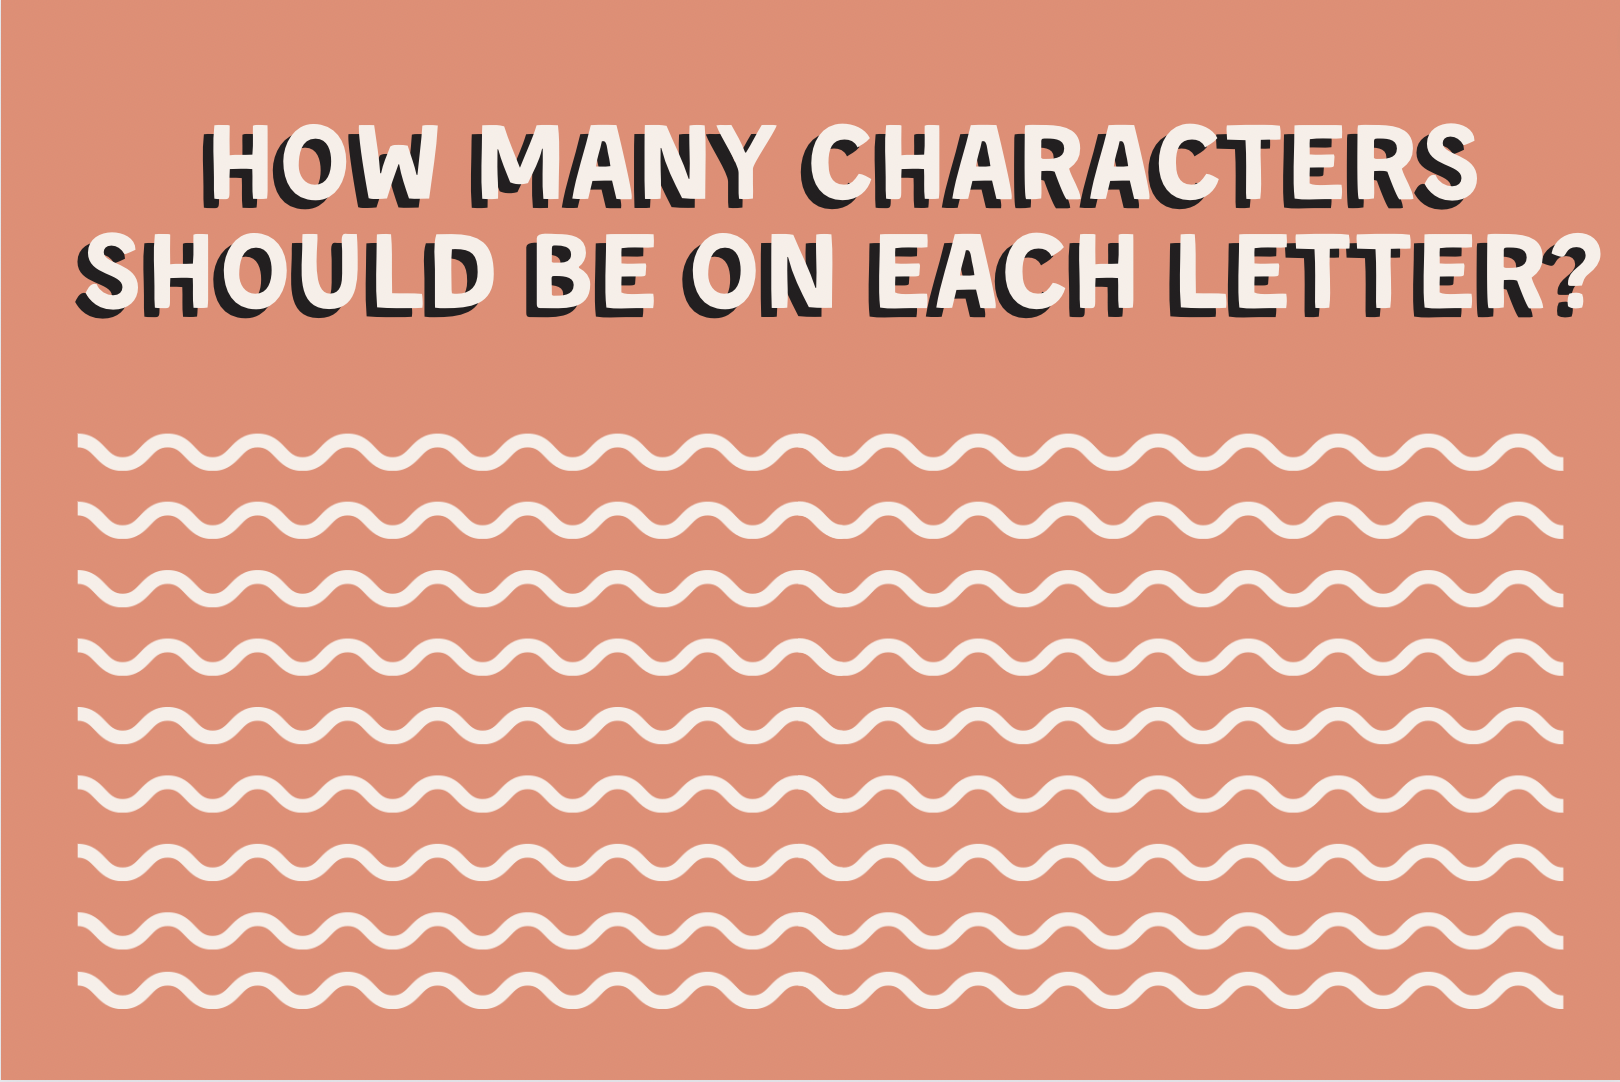 How Many Characters Should Be on Each Letter?